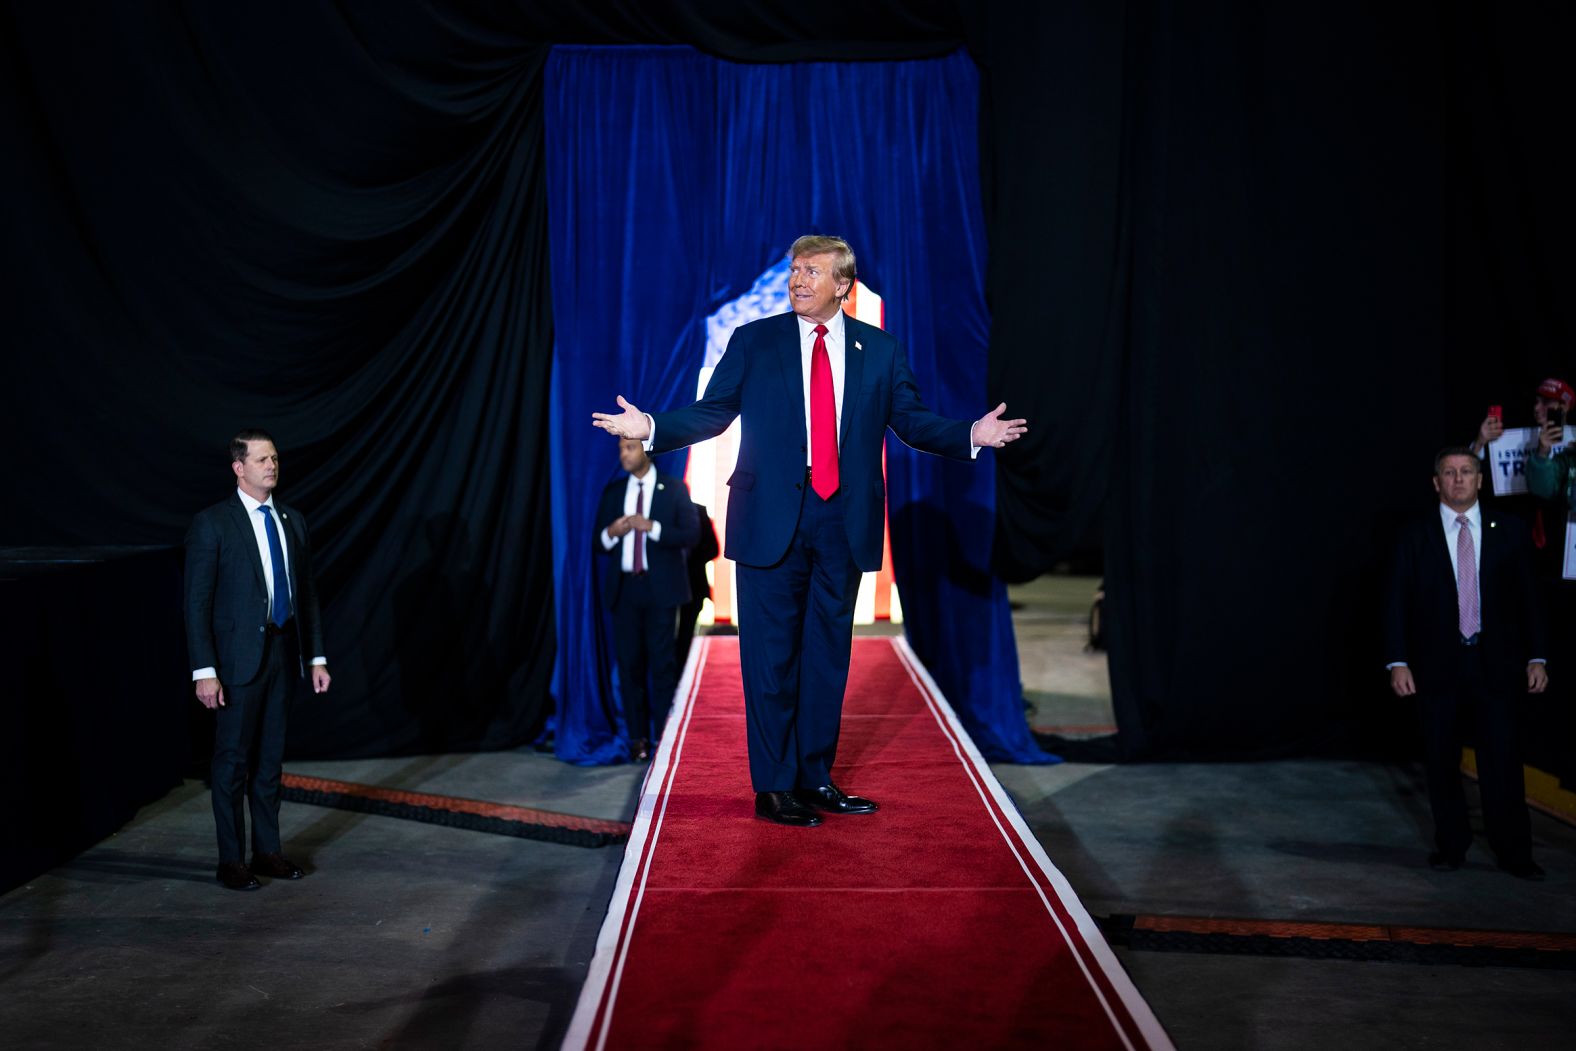 Trump delivers remarks at a campaign rally in Manchester, New Hampshire, in January 2024. Trump <a href="index.php?page=&url=https%3A%2F%2Fwww.cnn.com%2F2024%2F01%2F23%2Fpolitics%2Ftrump-new-hampshire-primary%2Findex.html" target="_blank">won the New Hampshire primary</a>, moving closer to his third straight presidential nomination and a rematch with President Joe Biden in the fall.